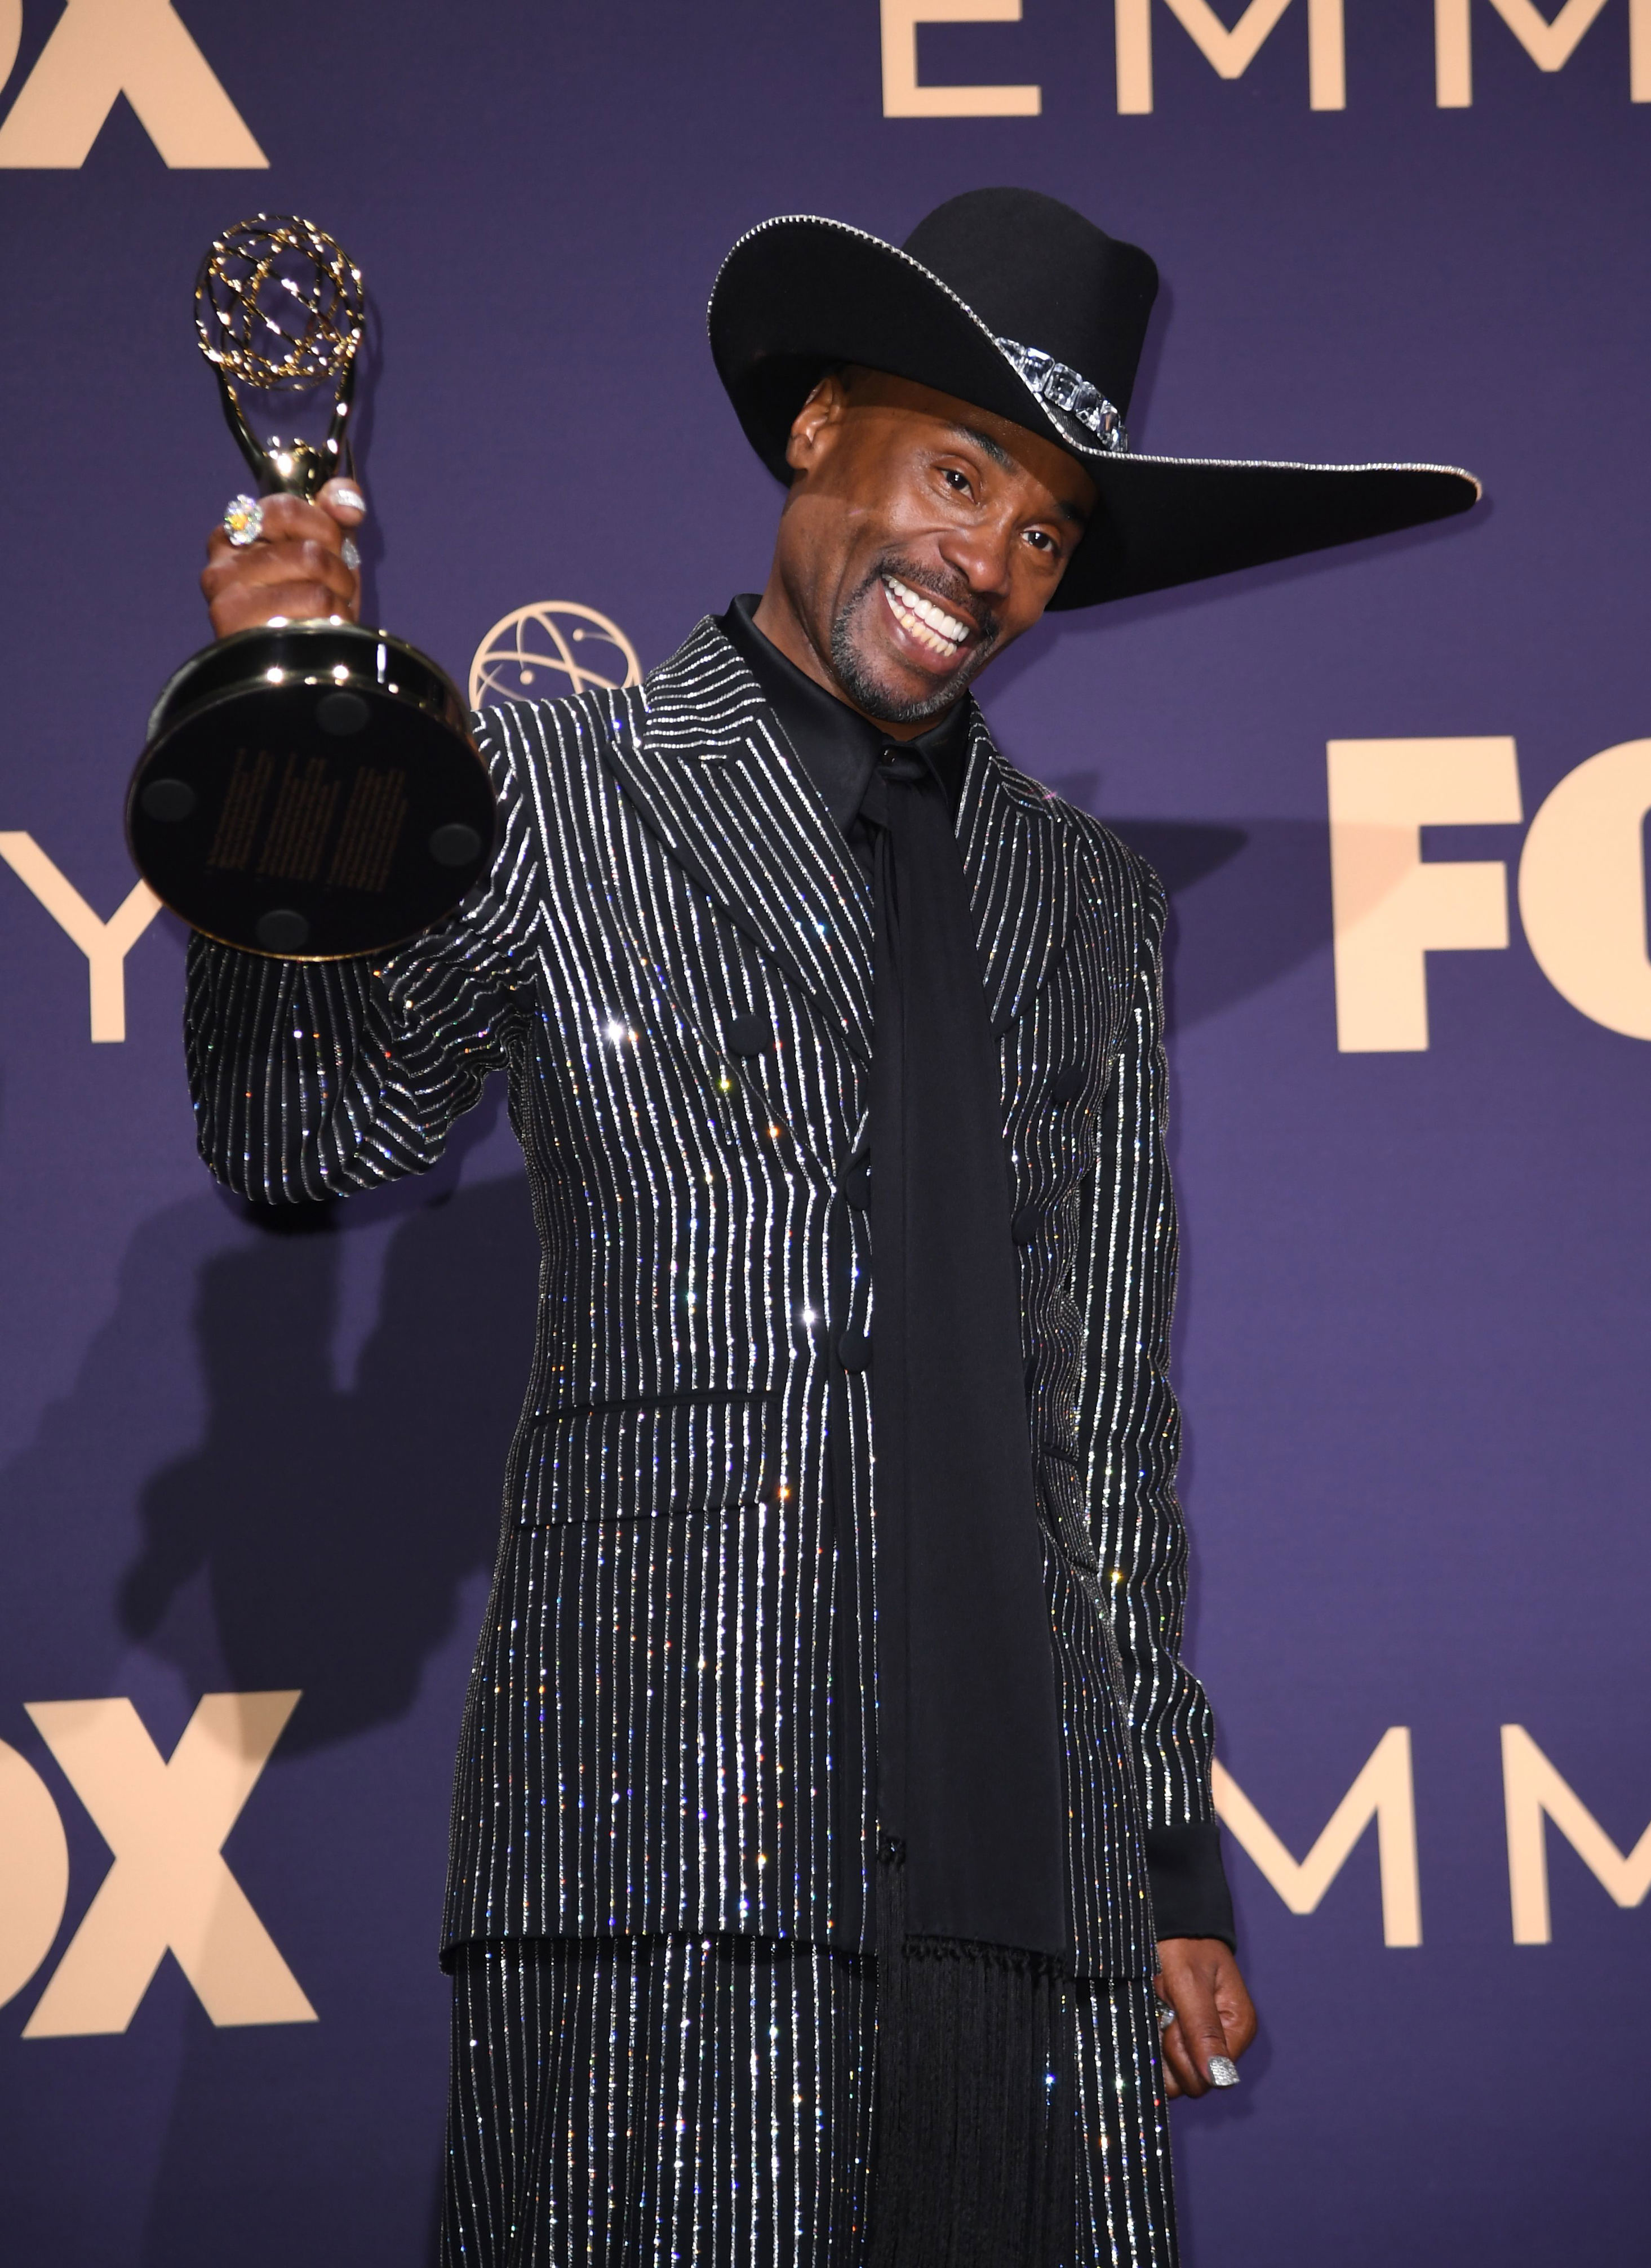 <p>Broadway singer-actor and "Pose" star Billy Porter made history at the <a href="https://www.wonderwall.com/awards-events/emmys/2019-emmy-awards-see-all-photos-red-carpet-3021170.gallery">2019 Emmy Awards</a> when he became <a href="https://www.wonderwall.com/awards-events/emmys/2019-primetime-emmys-whats-buzzing-what-everyones-talking-about-biggest-moments-trends-3021171.gallery?photoId=1063693">the first openly gay Black actor to win</a> outstanding lead actor in a drama series -- and he did it on his first Emmy nomination!</p>